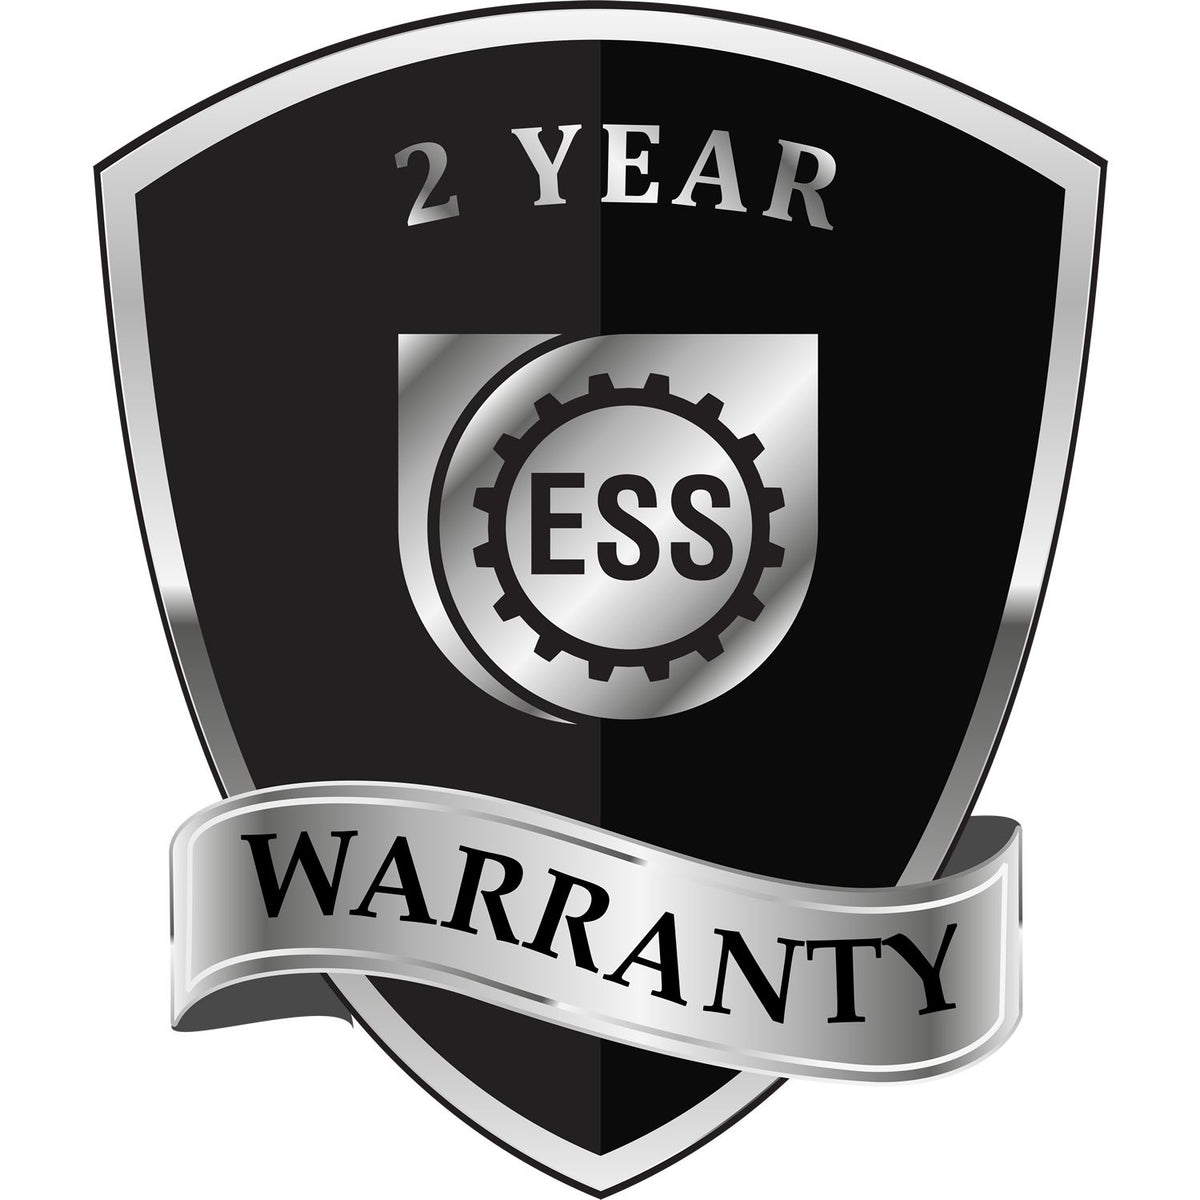 A badge or emblem showing a warranty icon for the Long Reach Minnesota PE Seal